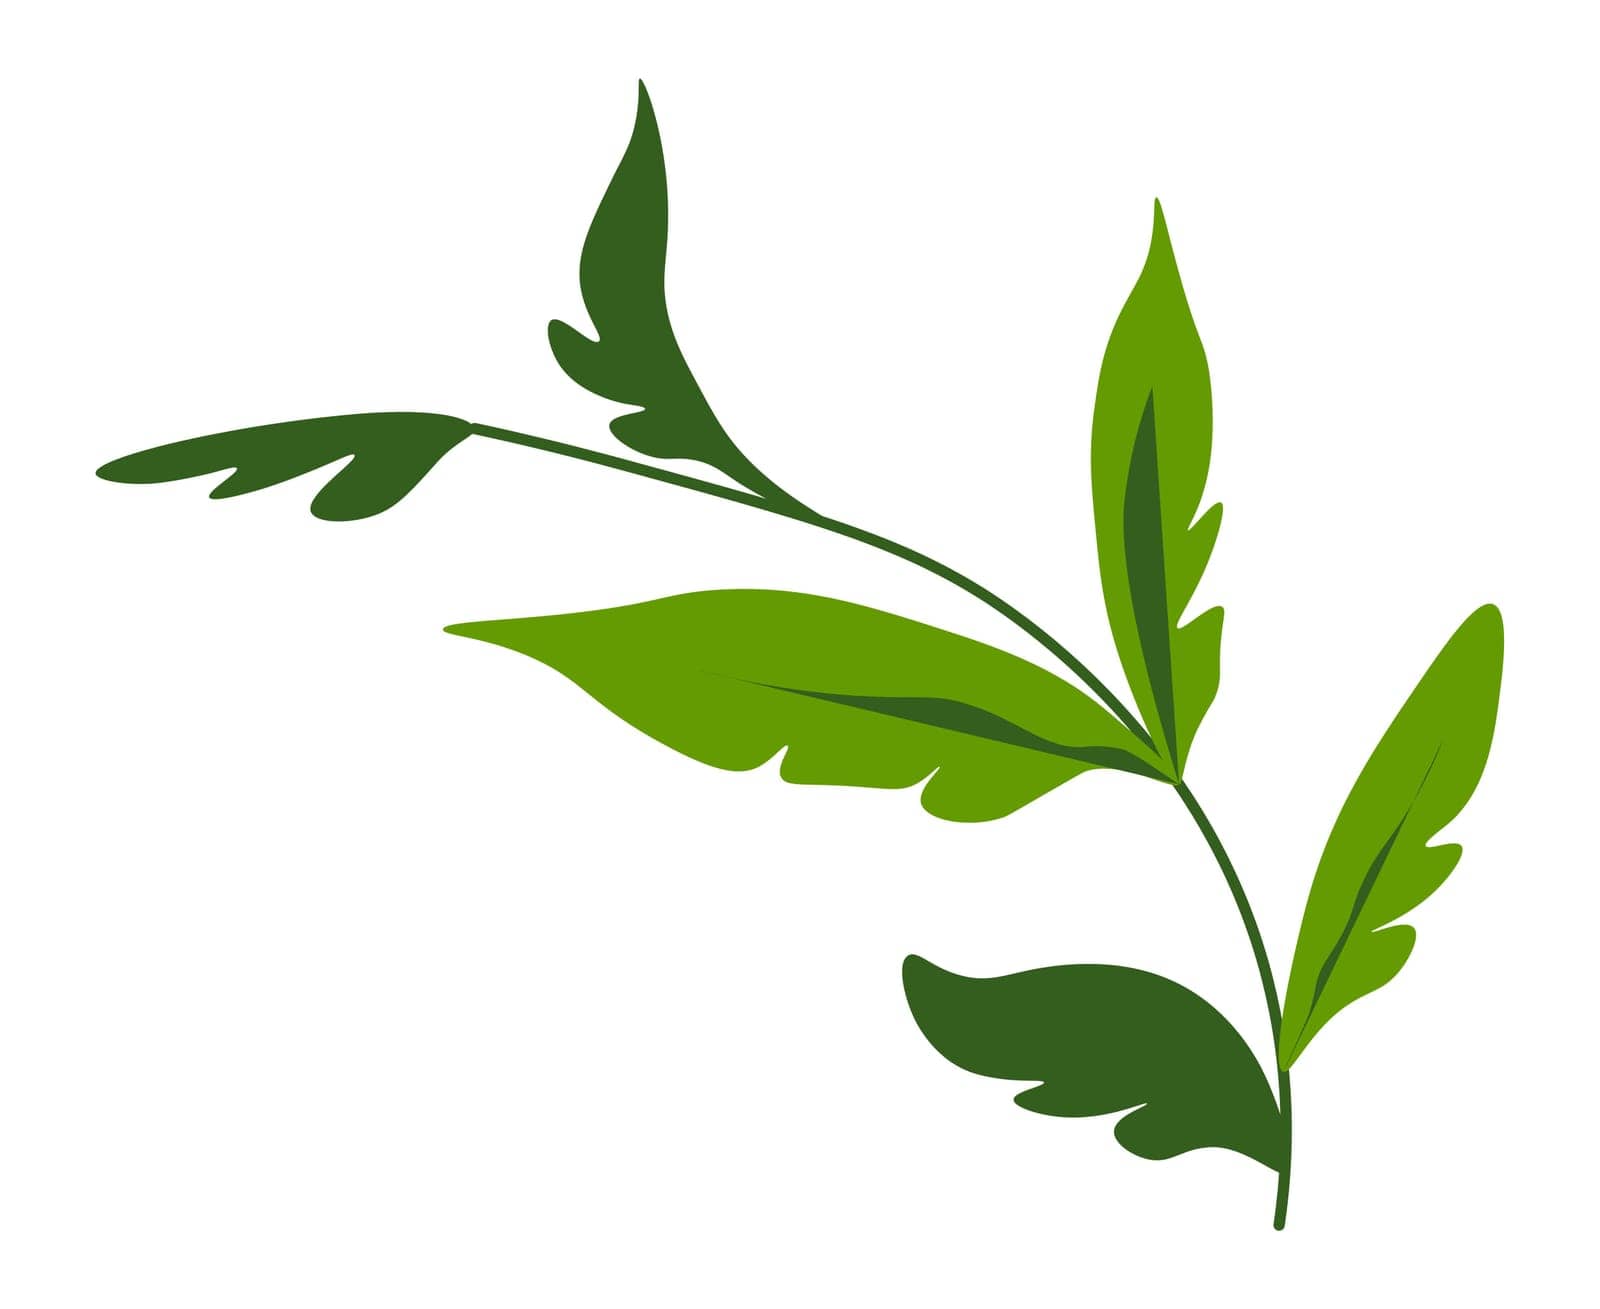 Flora and botany, branch with lush foliage vector by Sonulkaster